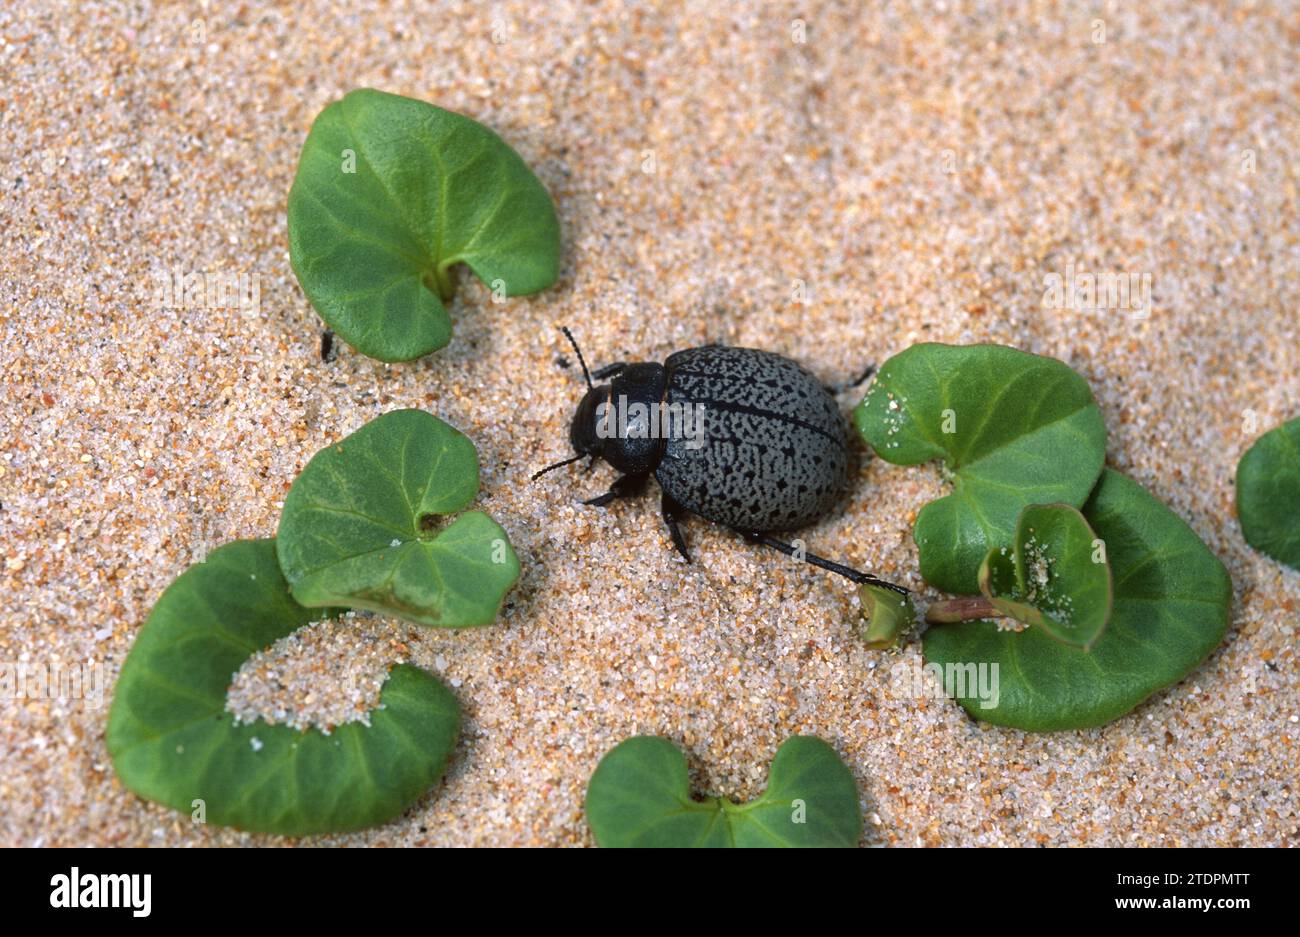 Pimelia fornicata is a medium beetle native to Spain and northern Africa. This photo was taken in Barbate dunes, Cadiz province, Andalusia, Spain. Stock Photo